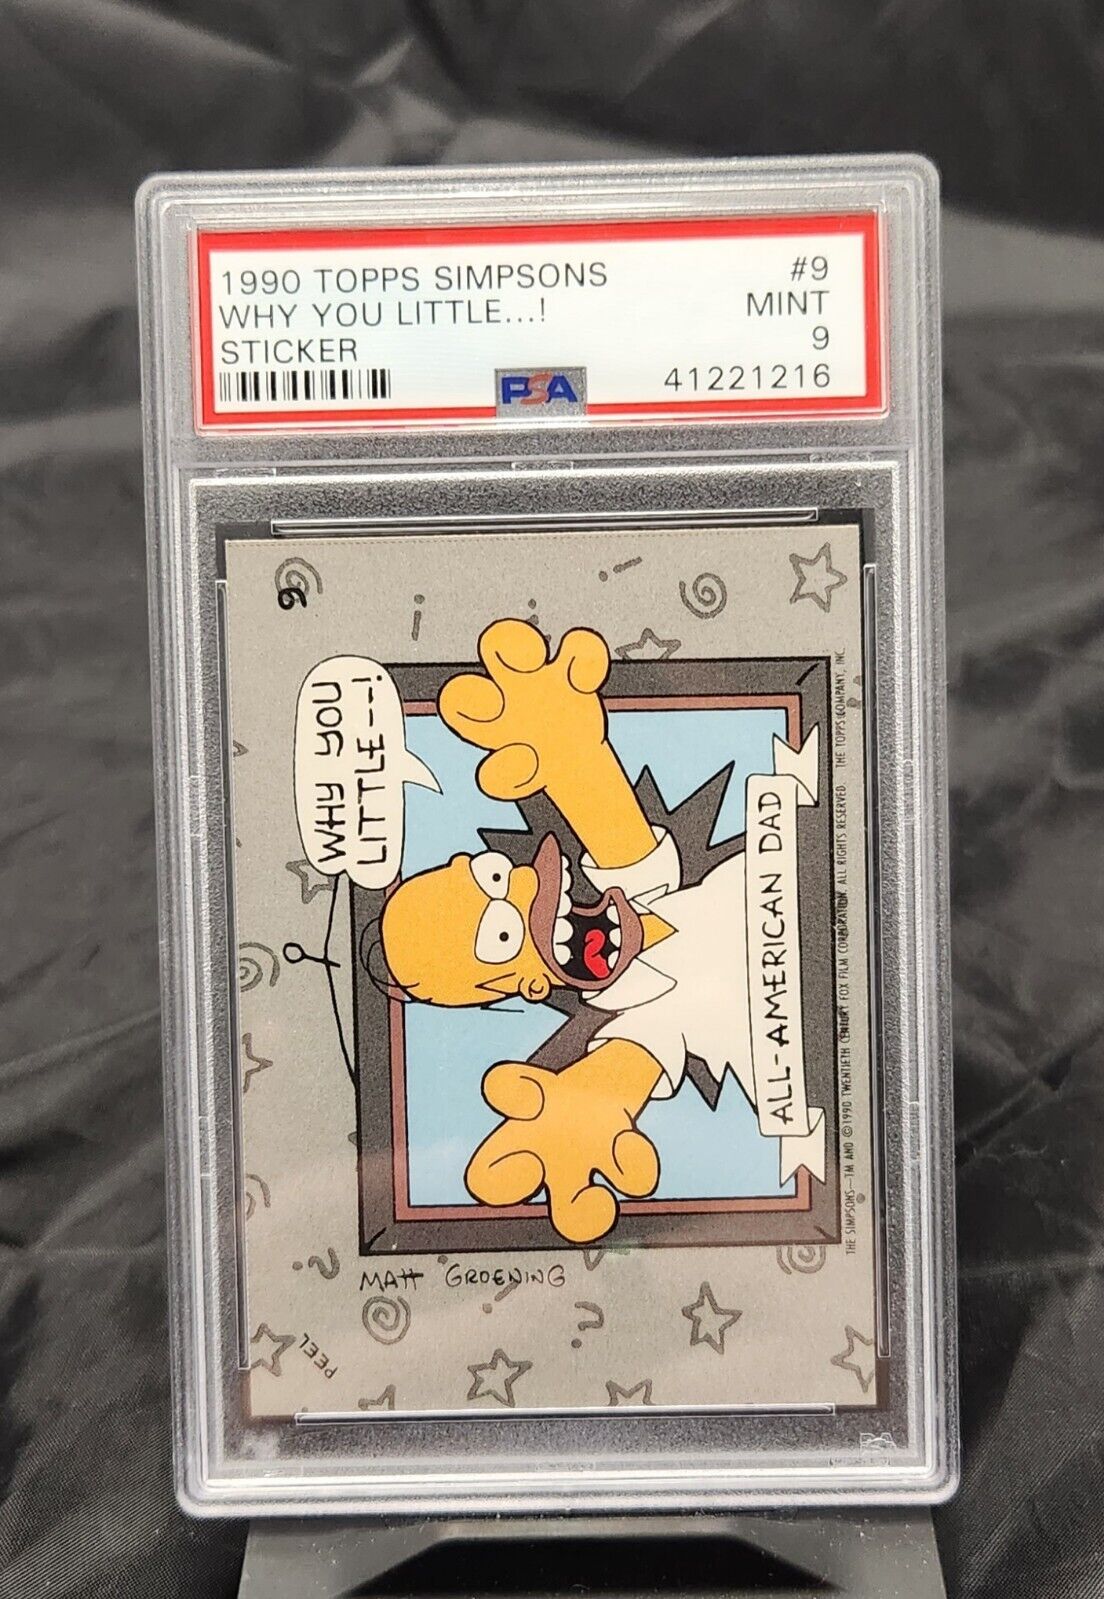 #9 Why You Little... - 1990 Topps Simspons PSA Graded 9 MINT - All American Dad